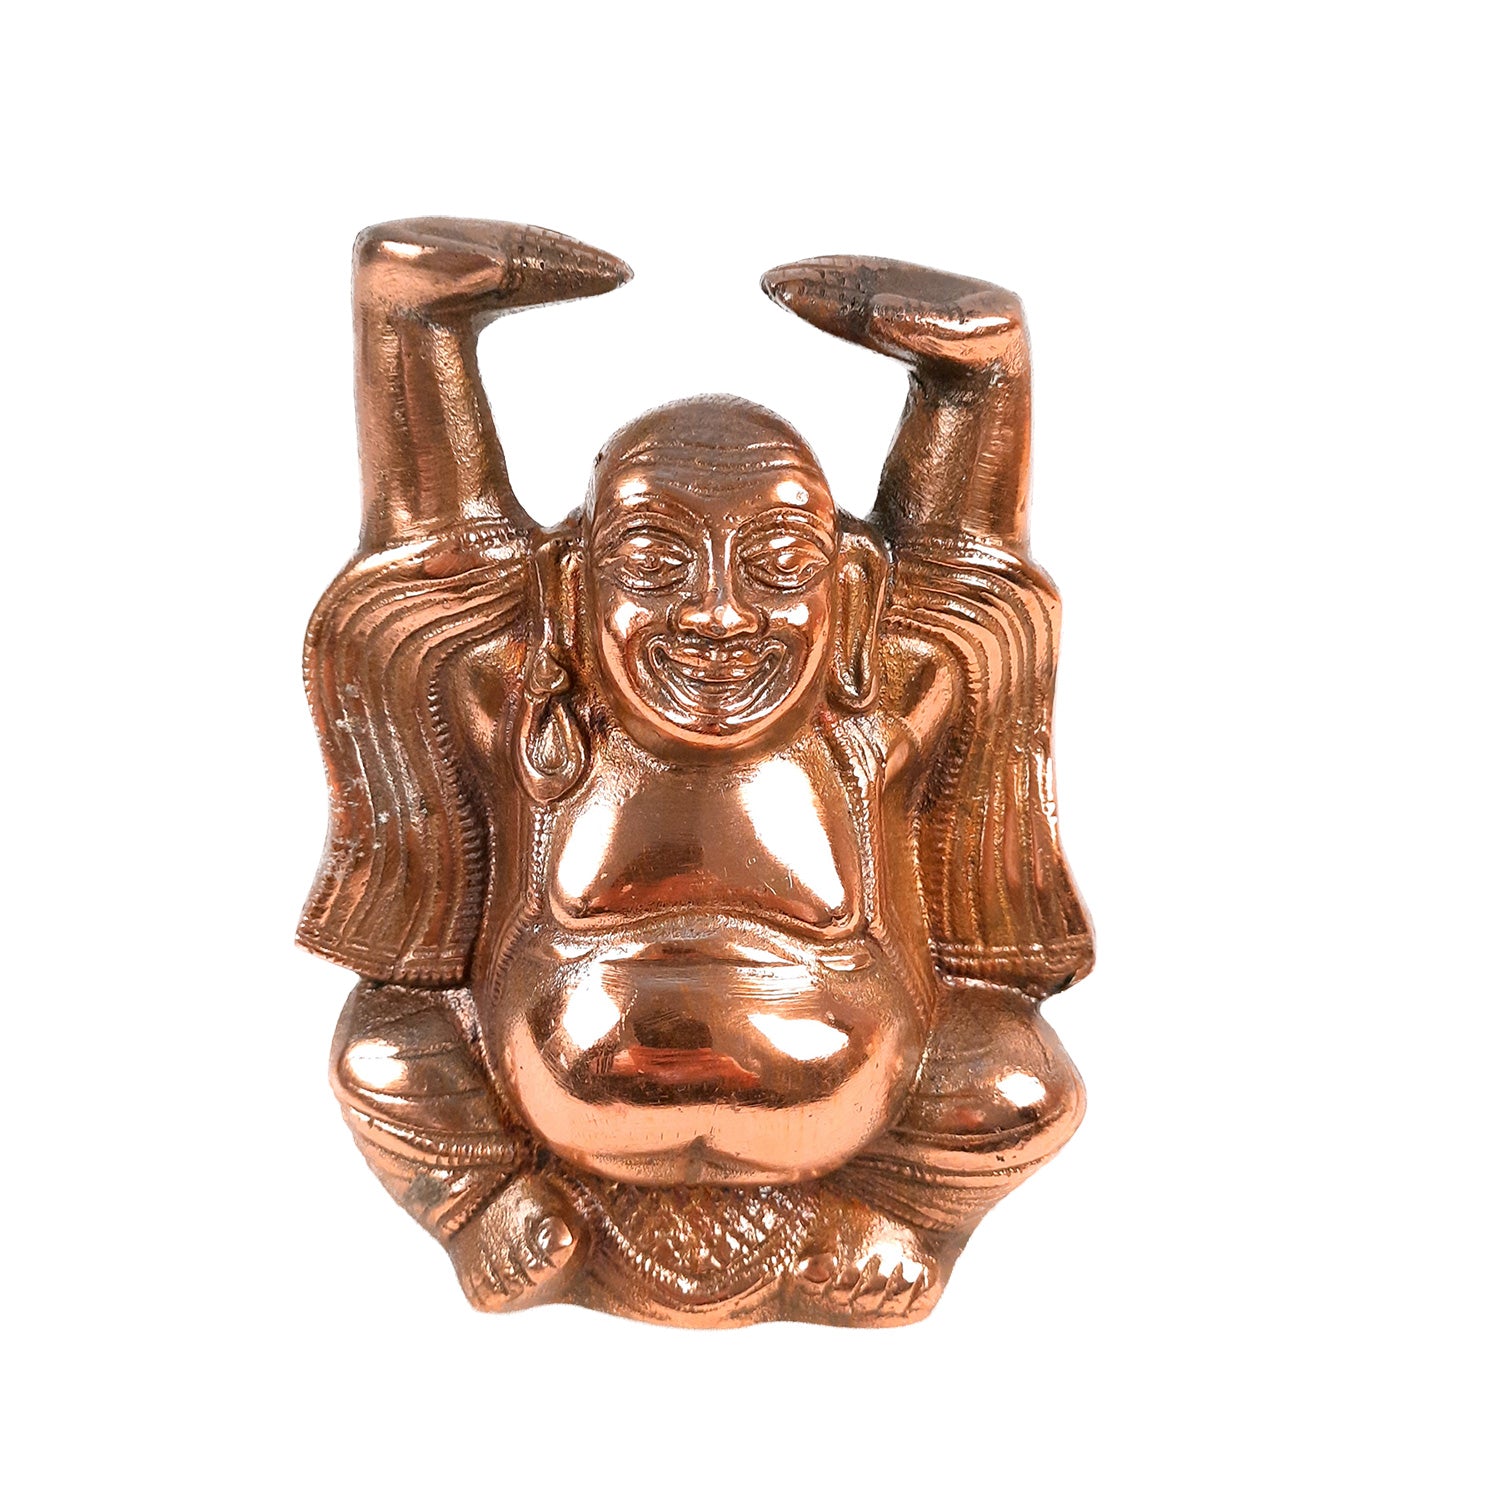 Laughing Buddha Showpiece For Good Luck | Laughing Buddha for Happiness, Positivity, Home Decor & Gift - 7 inch-Apkamart